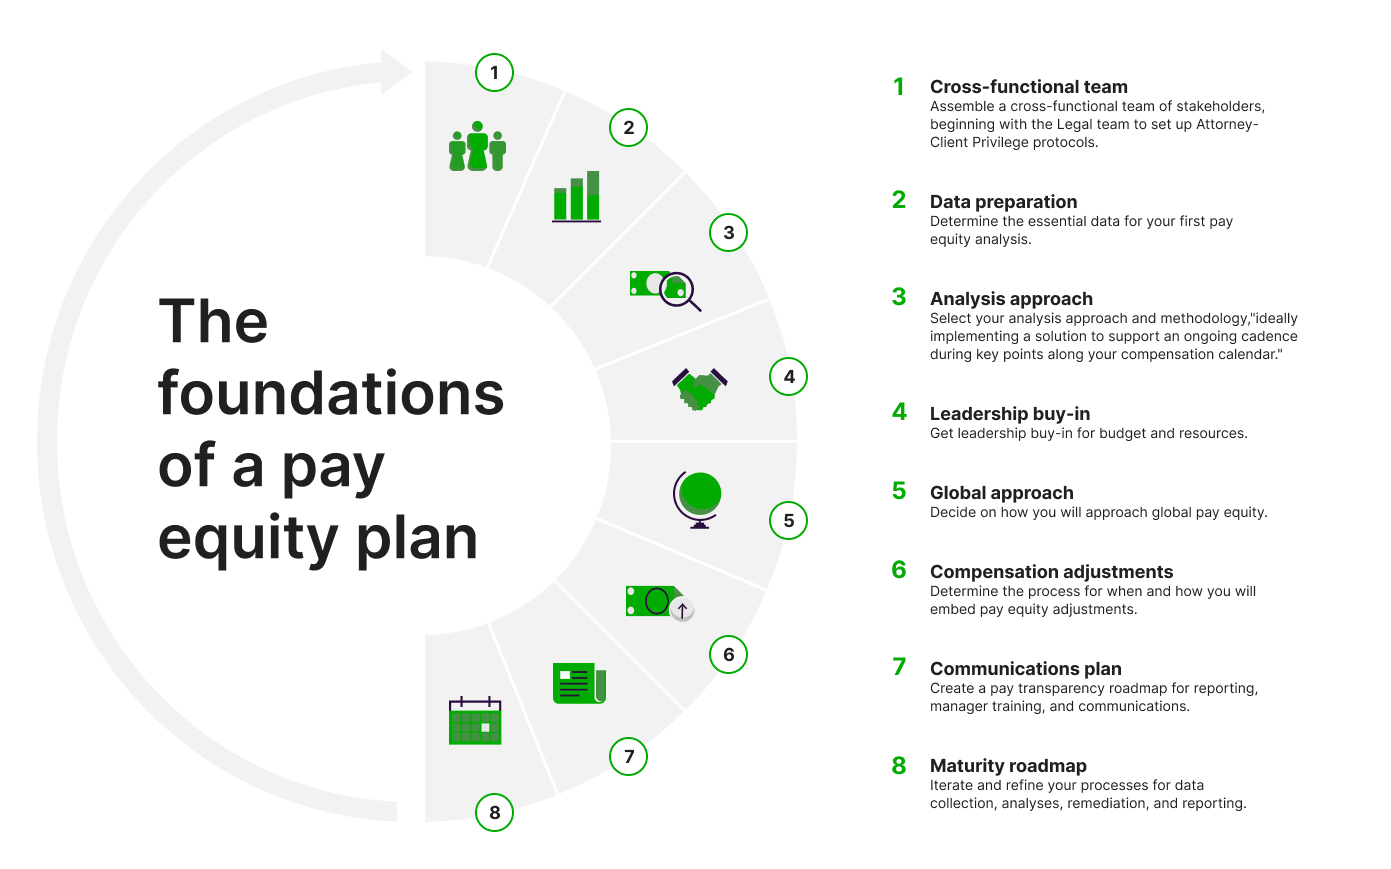 8 steps for building a comprehensive pay equity plan.